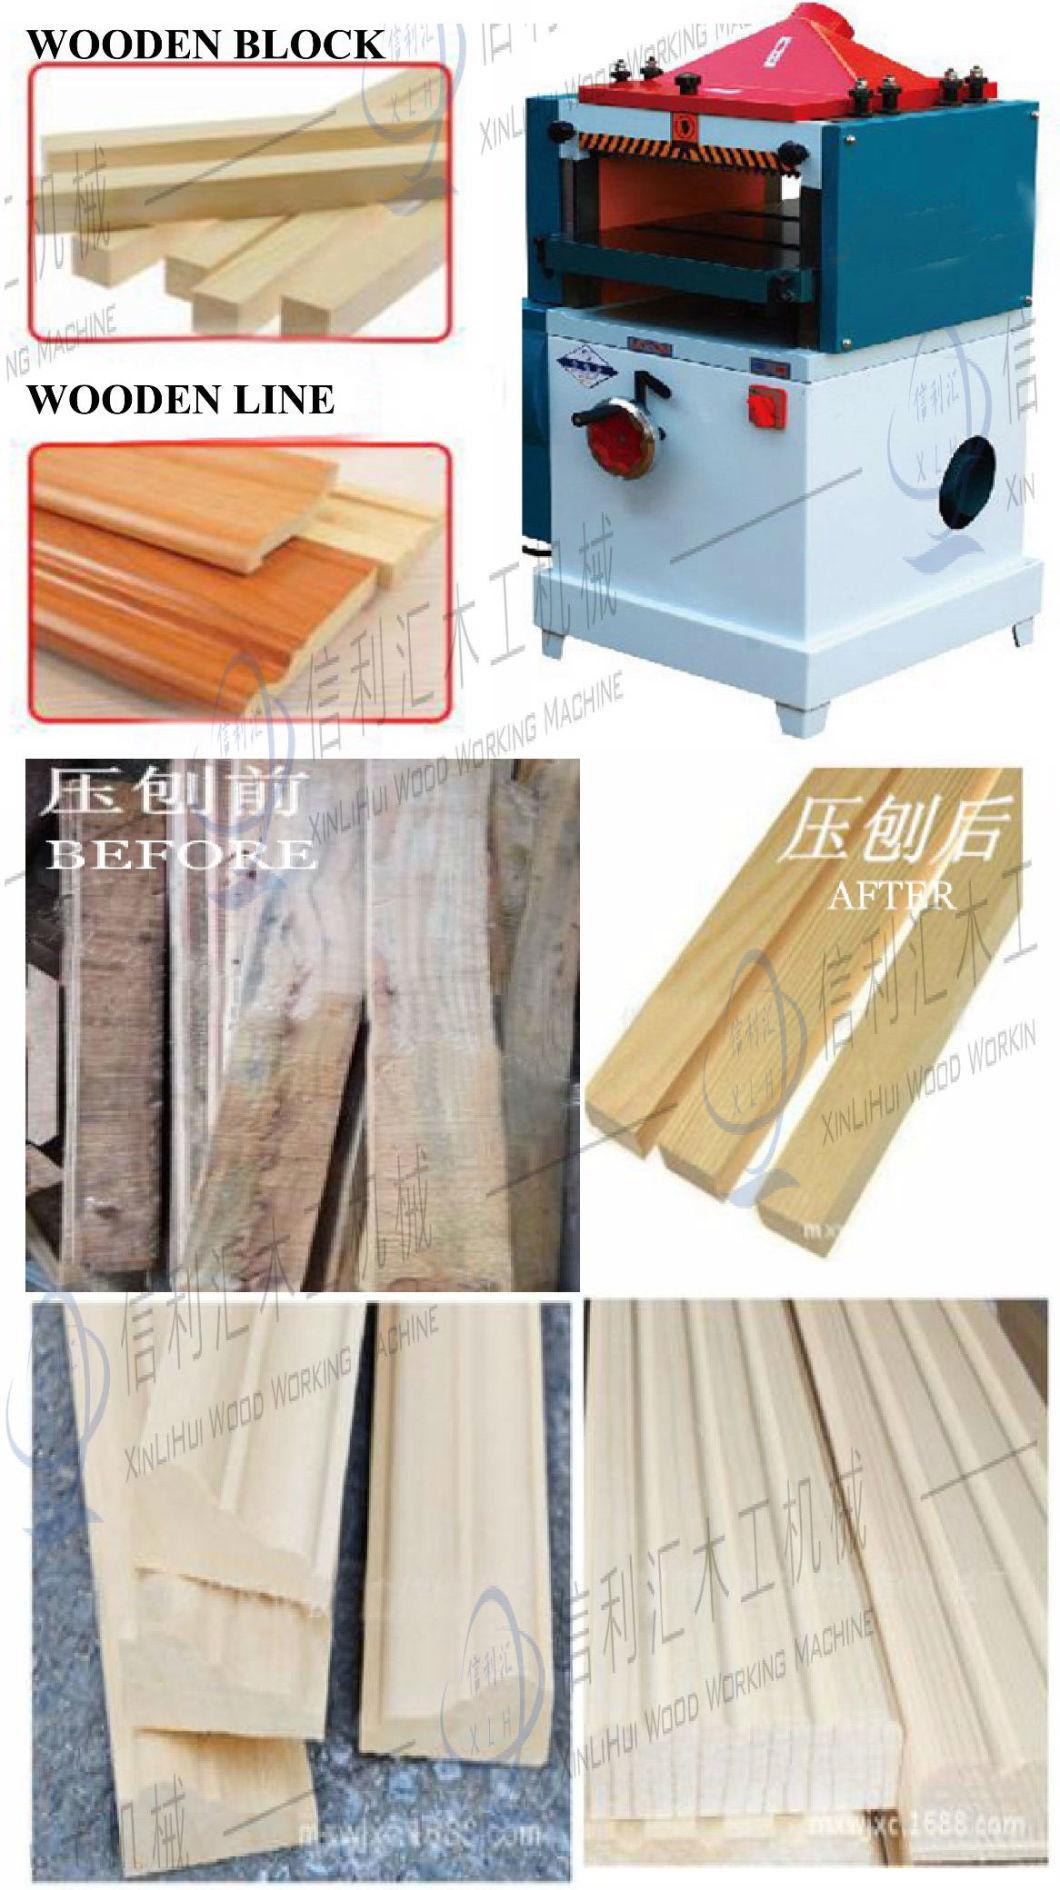 Guangzhou Planer Surfacer and Thickness Machine, Guangzhou Solid Woodworking Surface Planer and Thickness, Solid Woodworking Surface Planer and Thickness